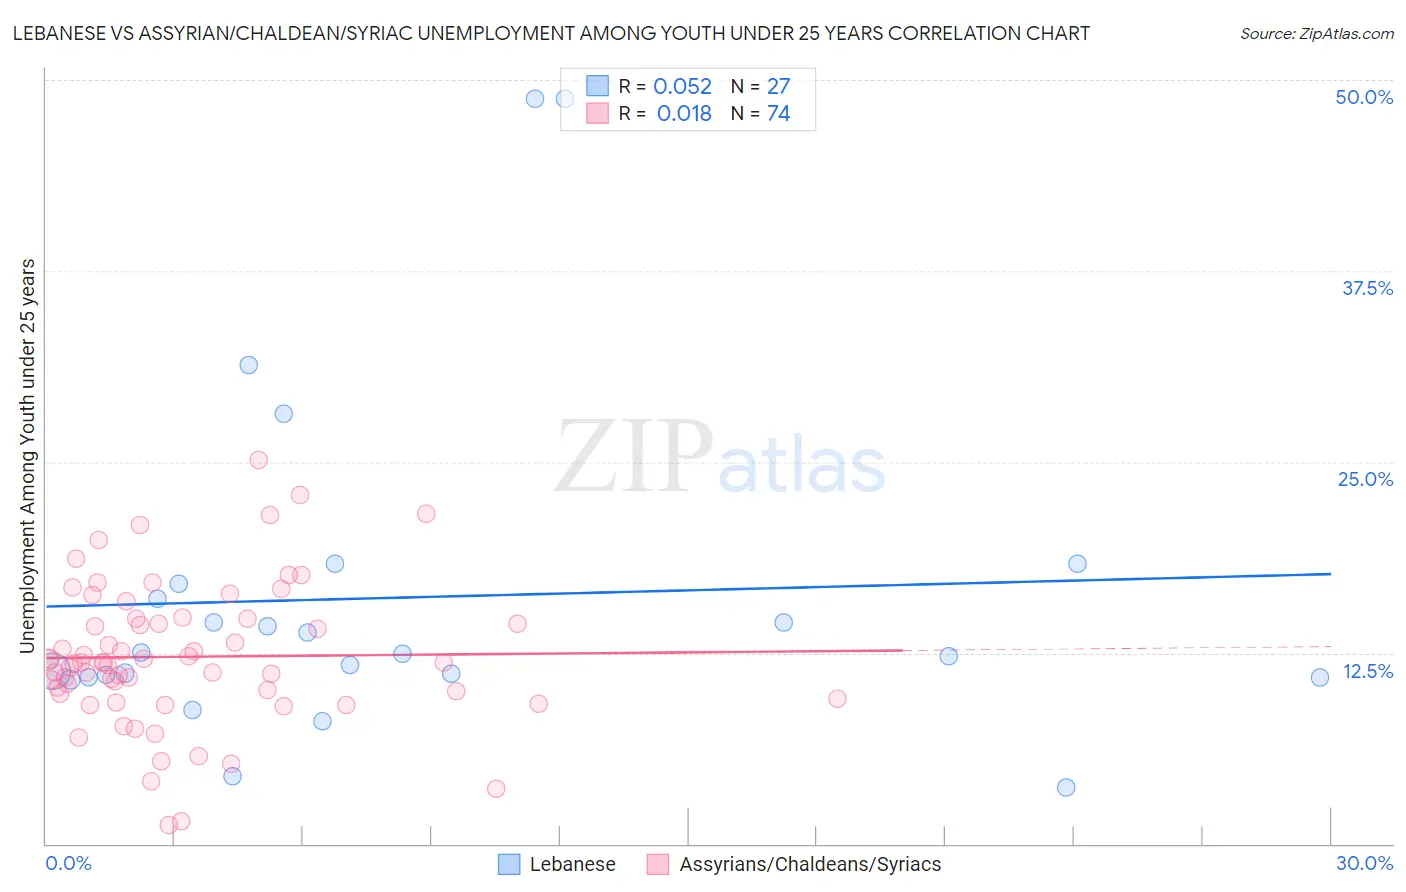 Lebanese vs Assyrian/Chaldean/Syriac Unemployment Among Youth under 25 years